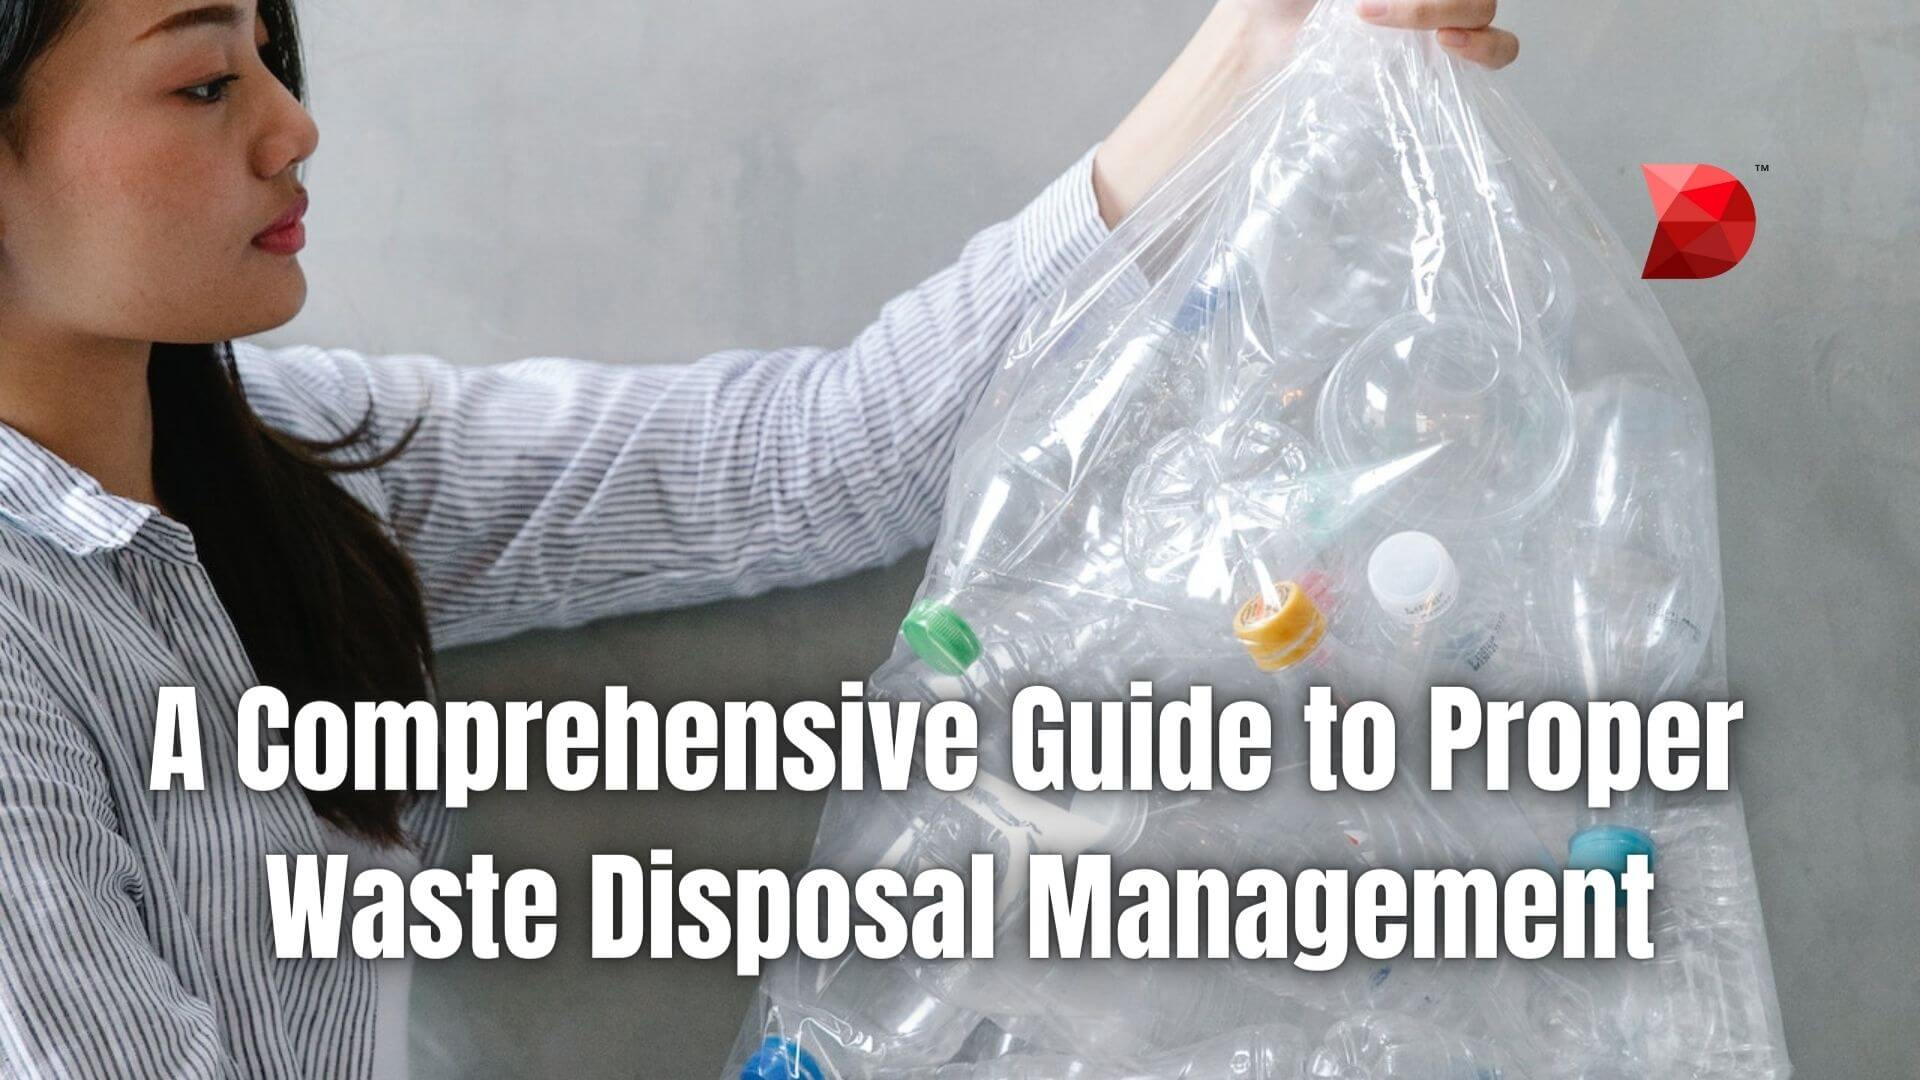 How to Safely Dispose of Broken Glass: Ultimate Guide